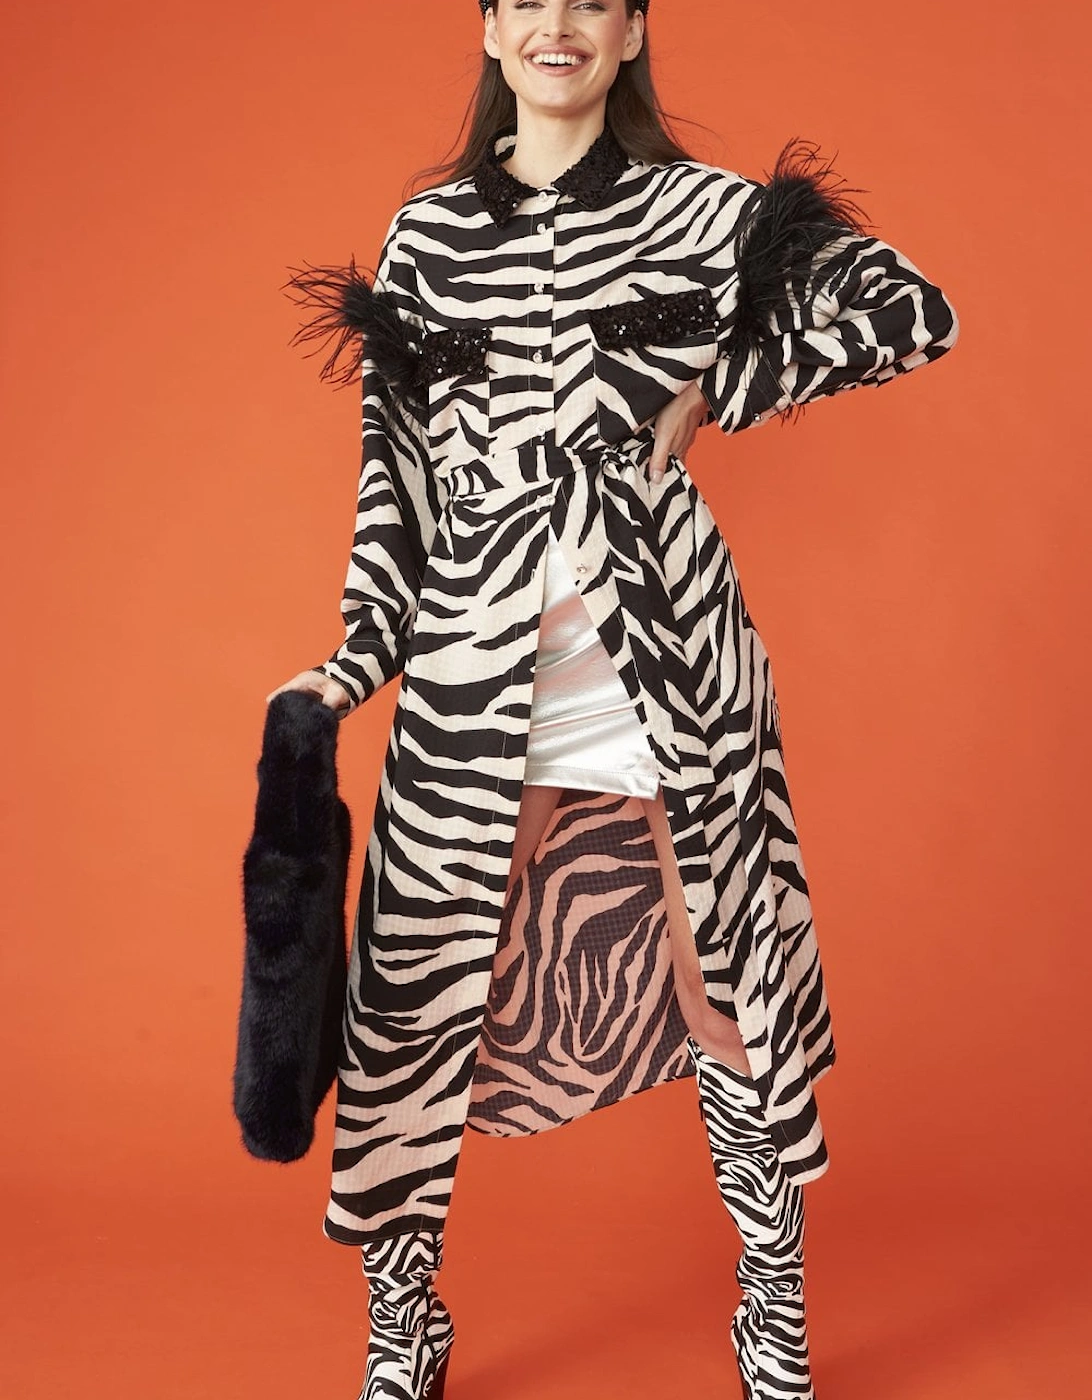 Zebra Trench Coat with Feather Trim and Embellished Collar